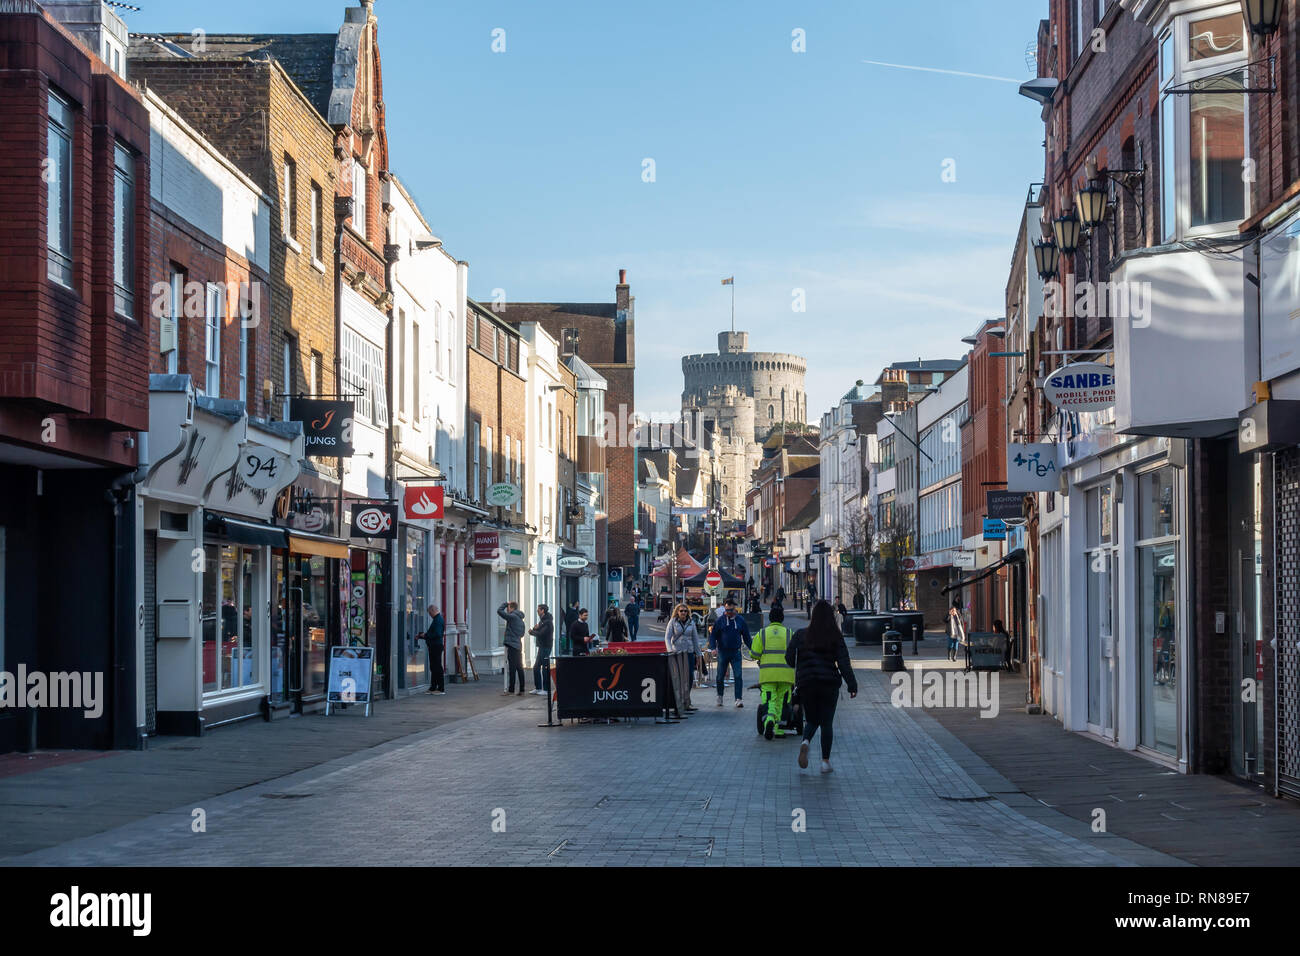 A view down Peascod Street in Windsor, Berkshire, UK in the morning. Stock Photo